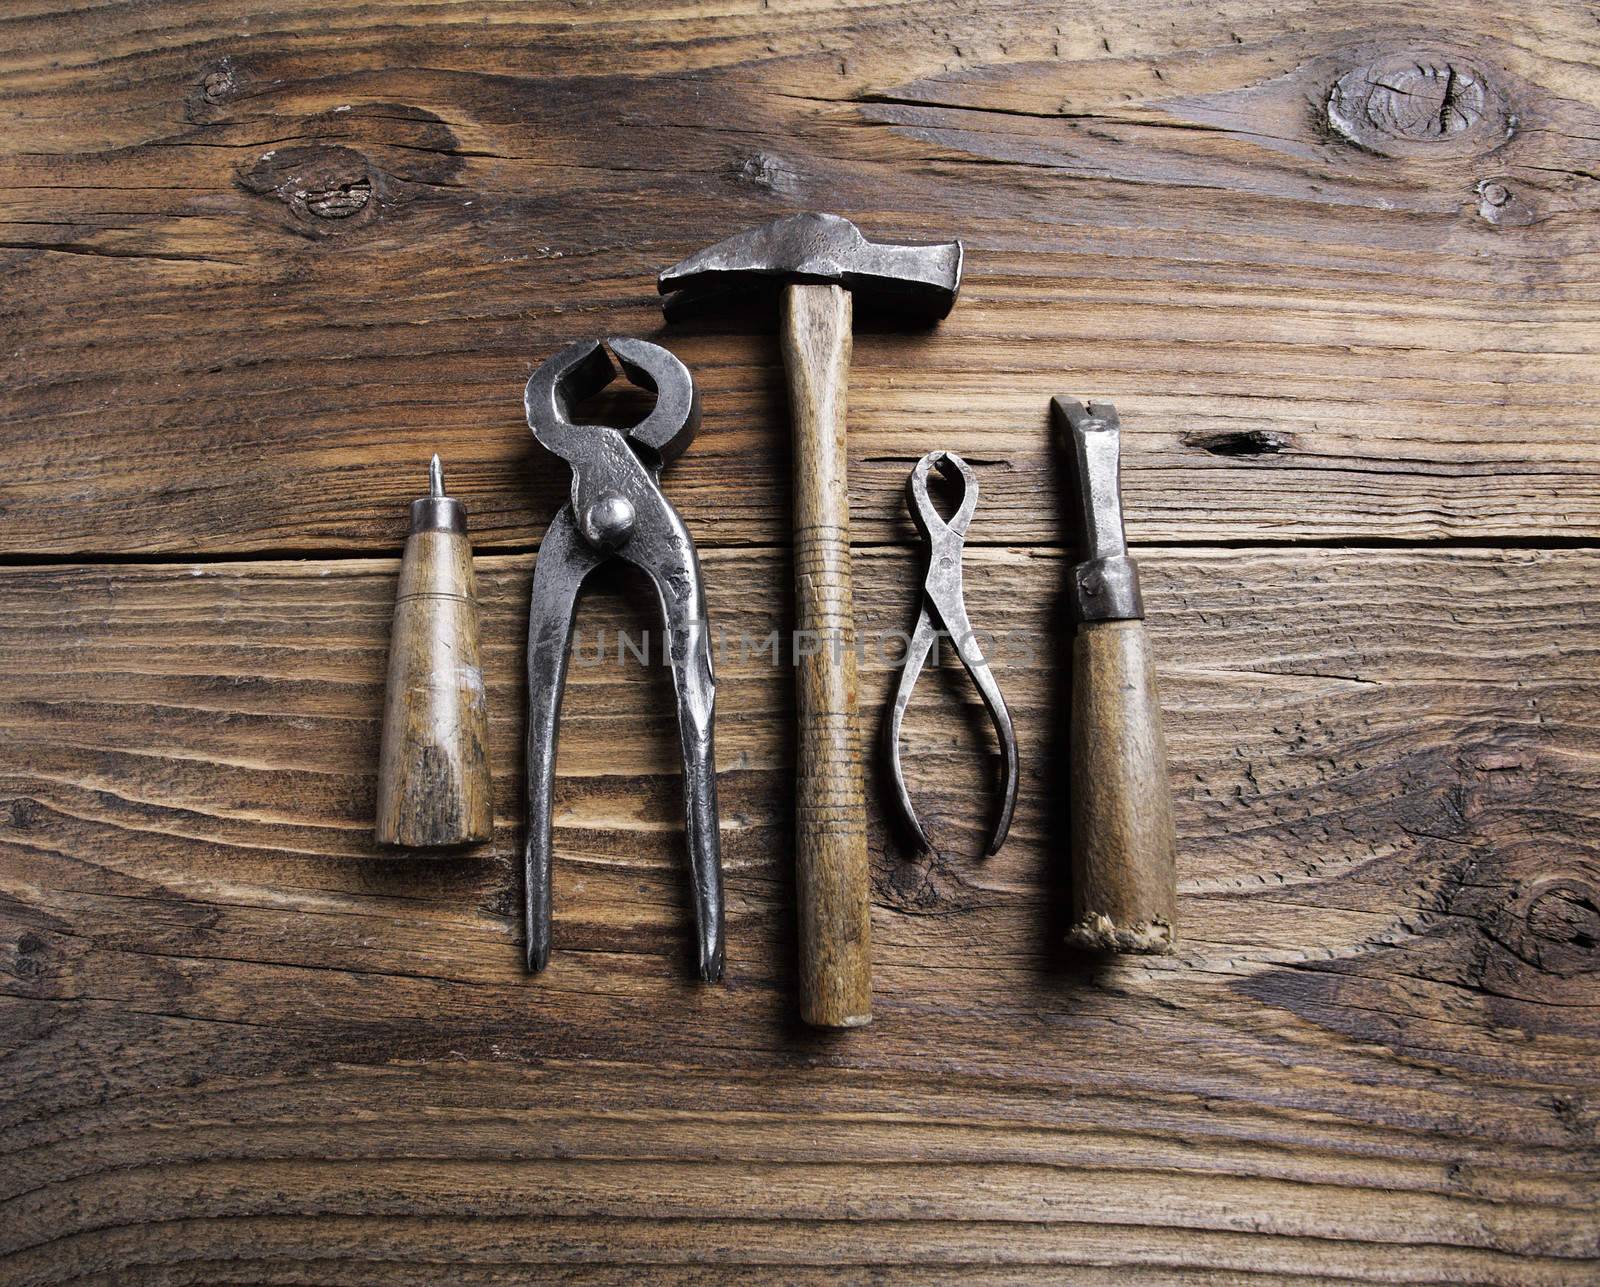 Carpenter's tools by stokkete